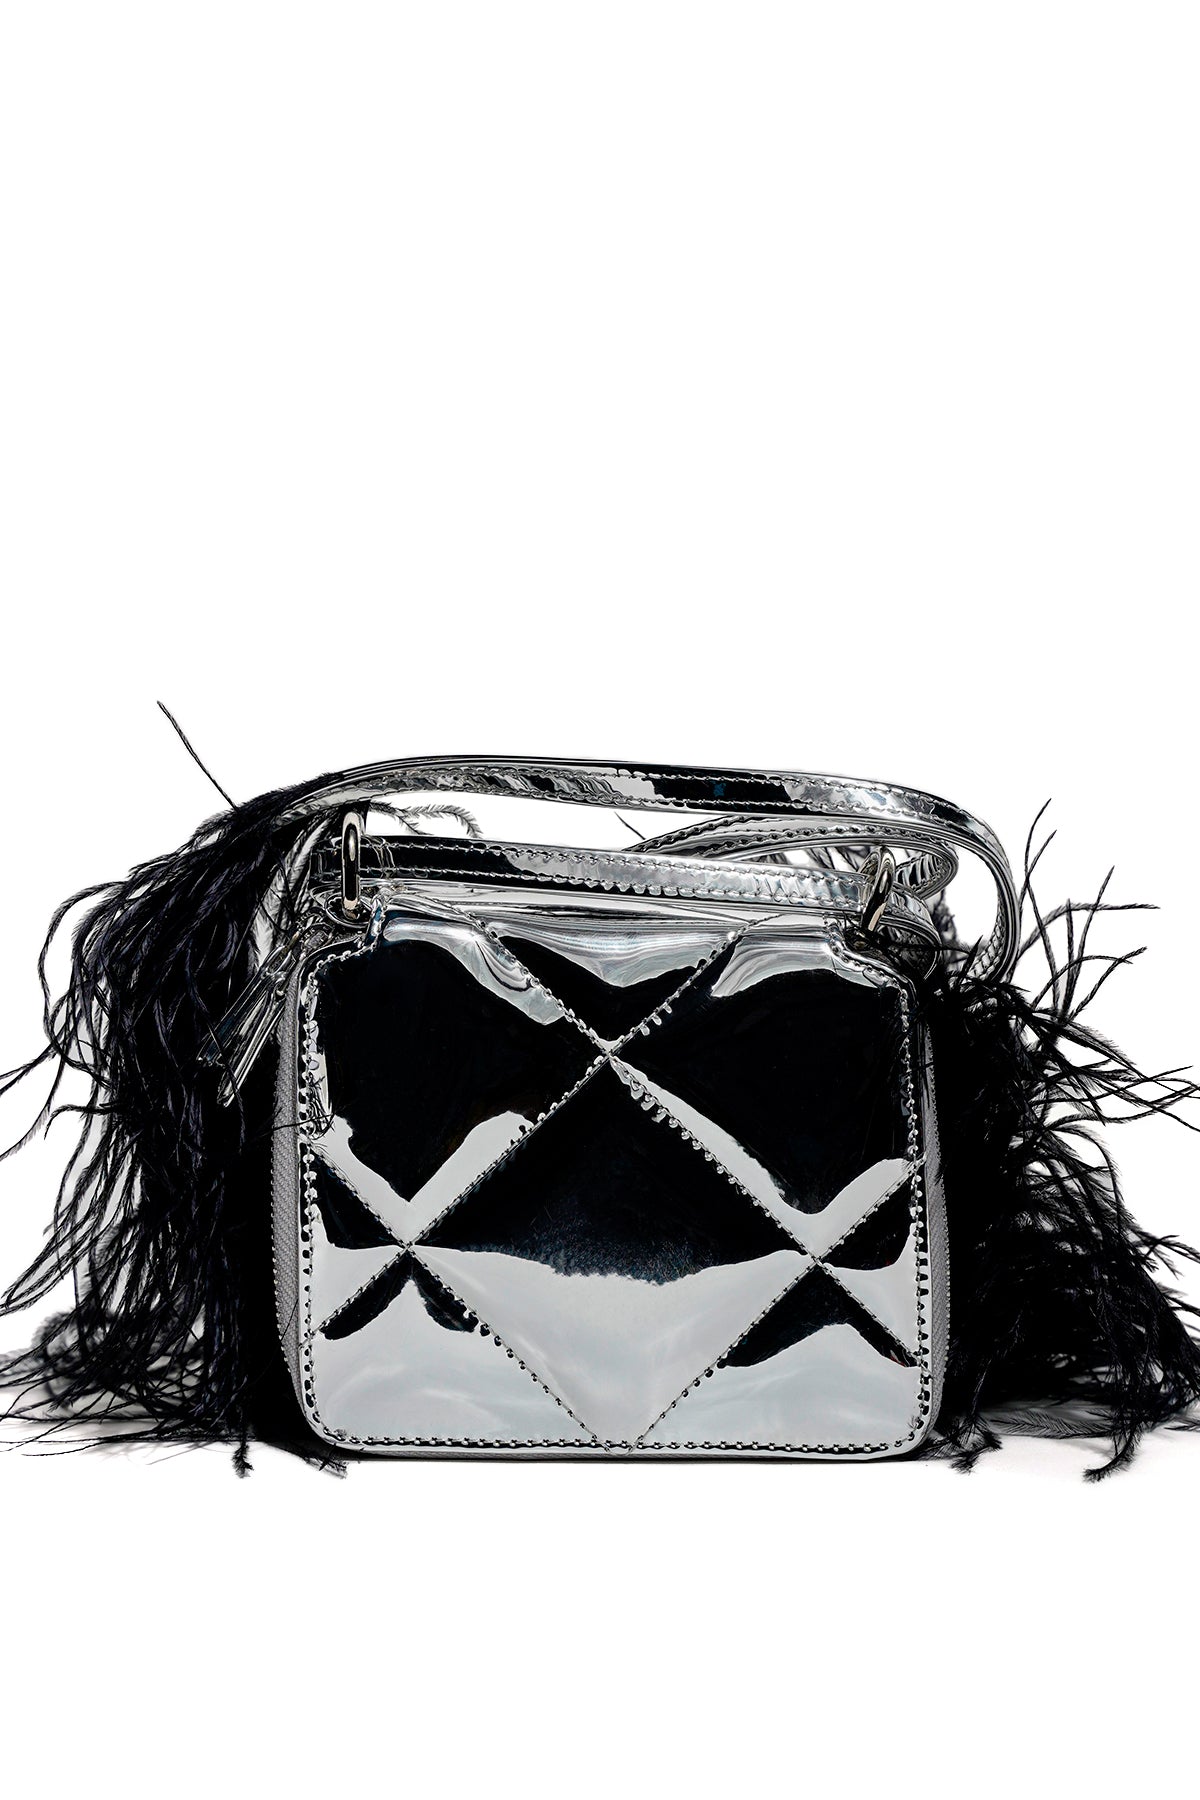 SILVER WALLET BAG WITH FEATHER STRAP marques almeida